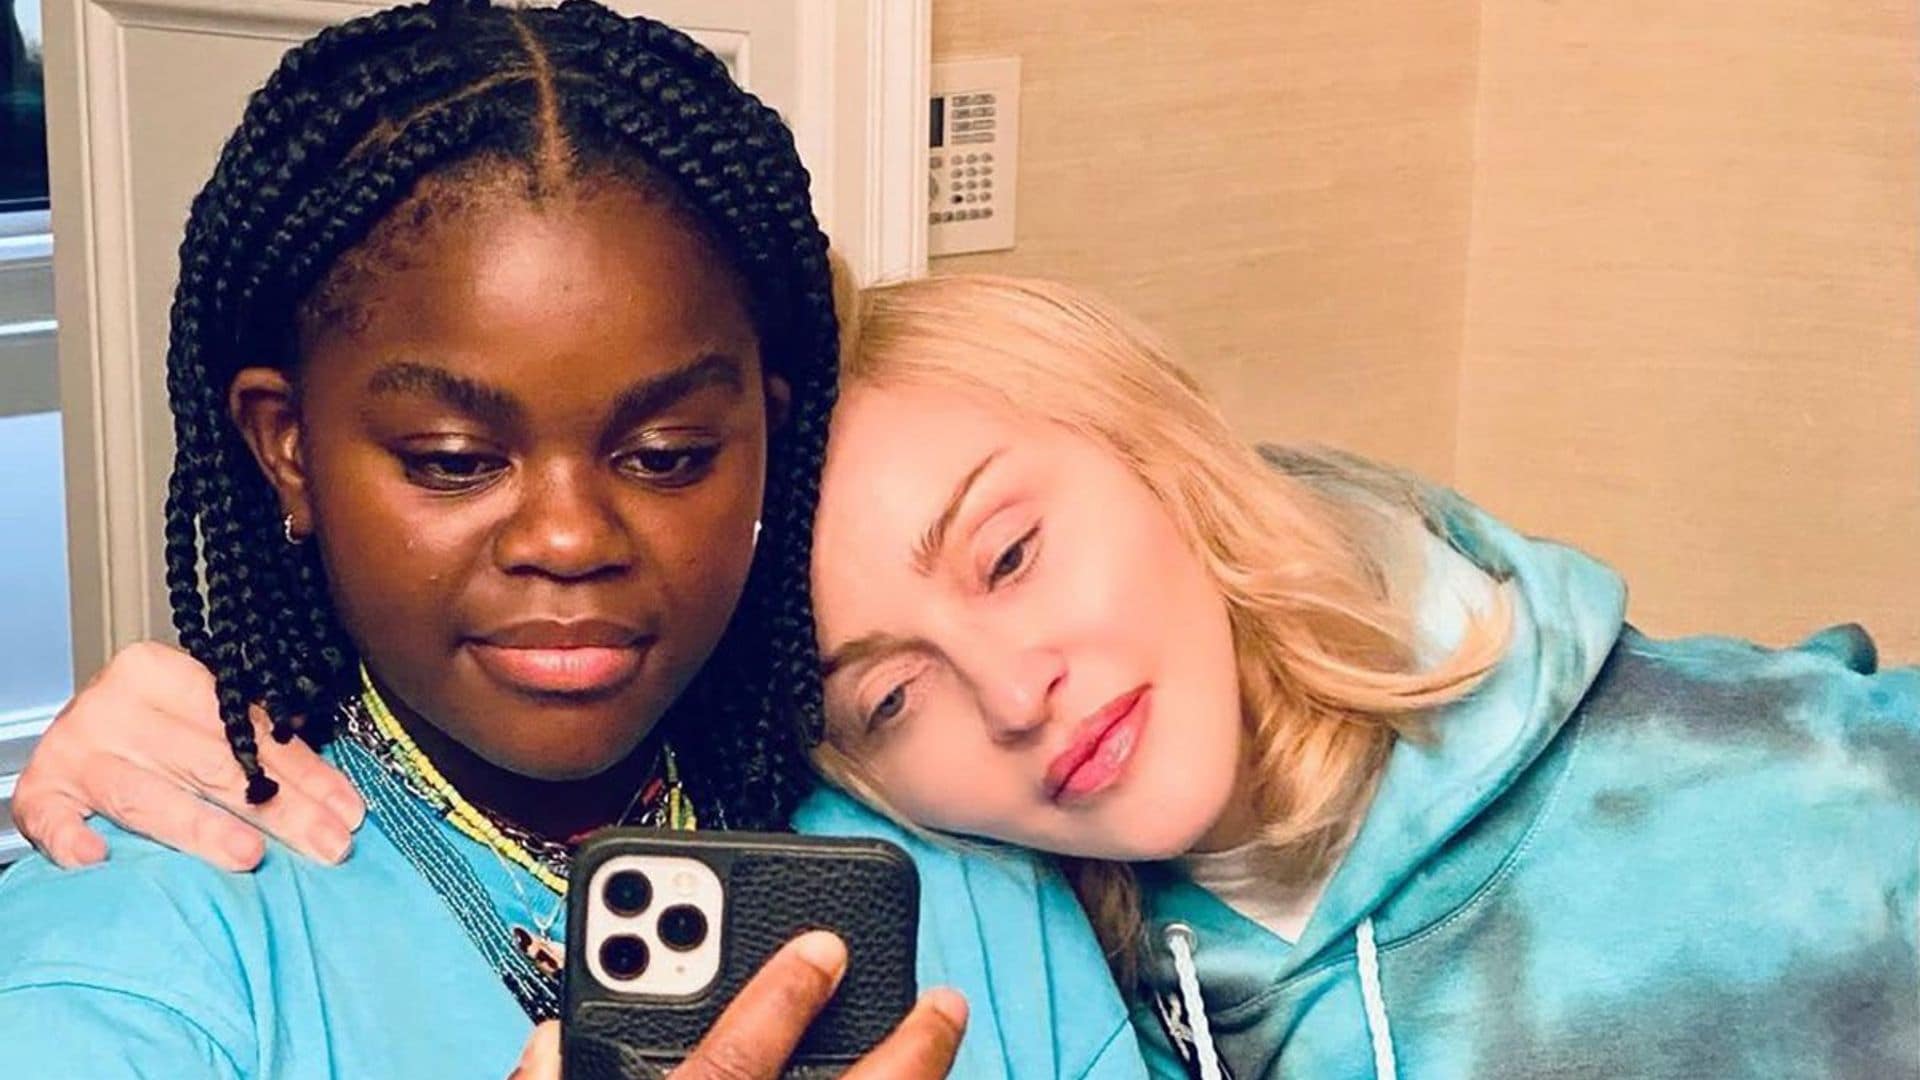 Madonna throws an epic skate party with Rosie O’Donnell for her daughter Mercy James’ 15th birthday!